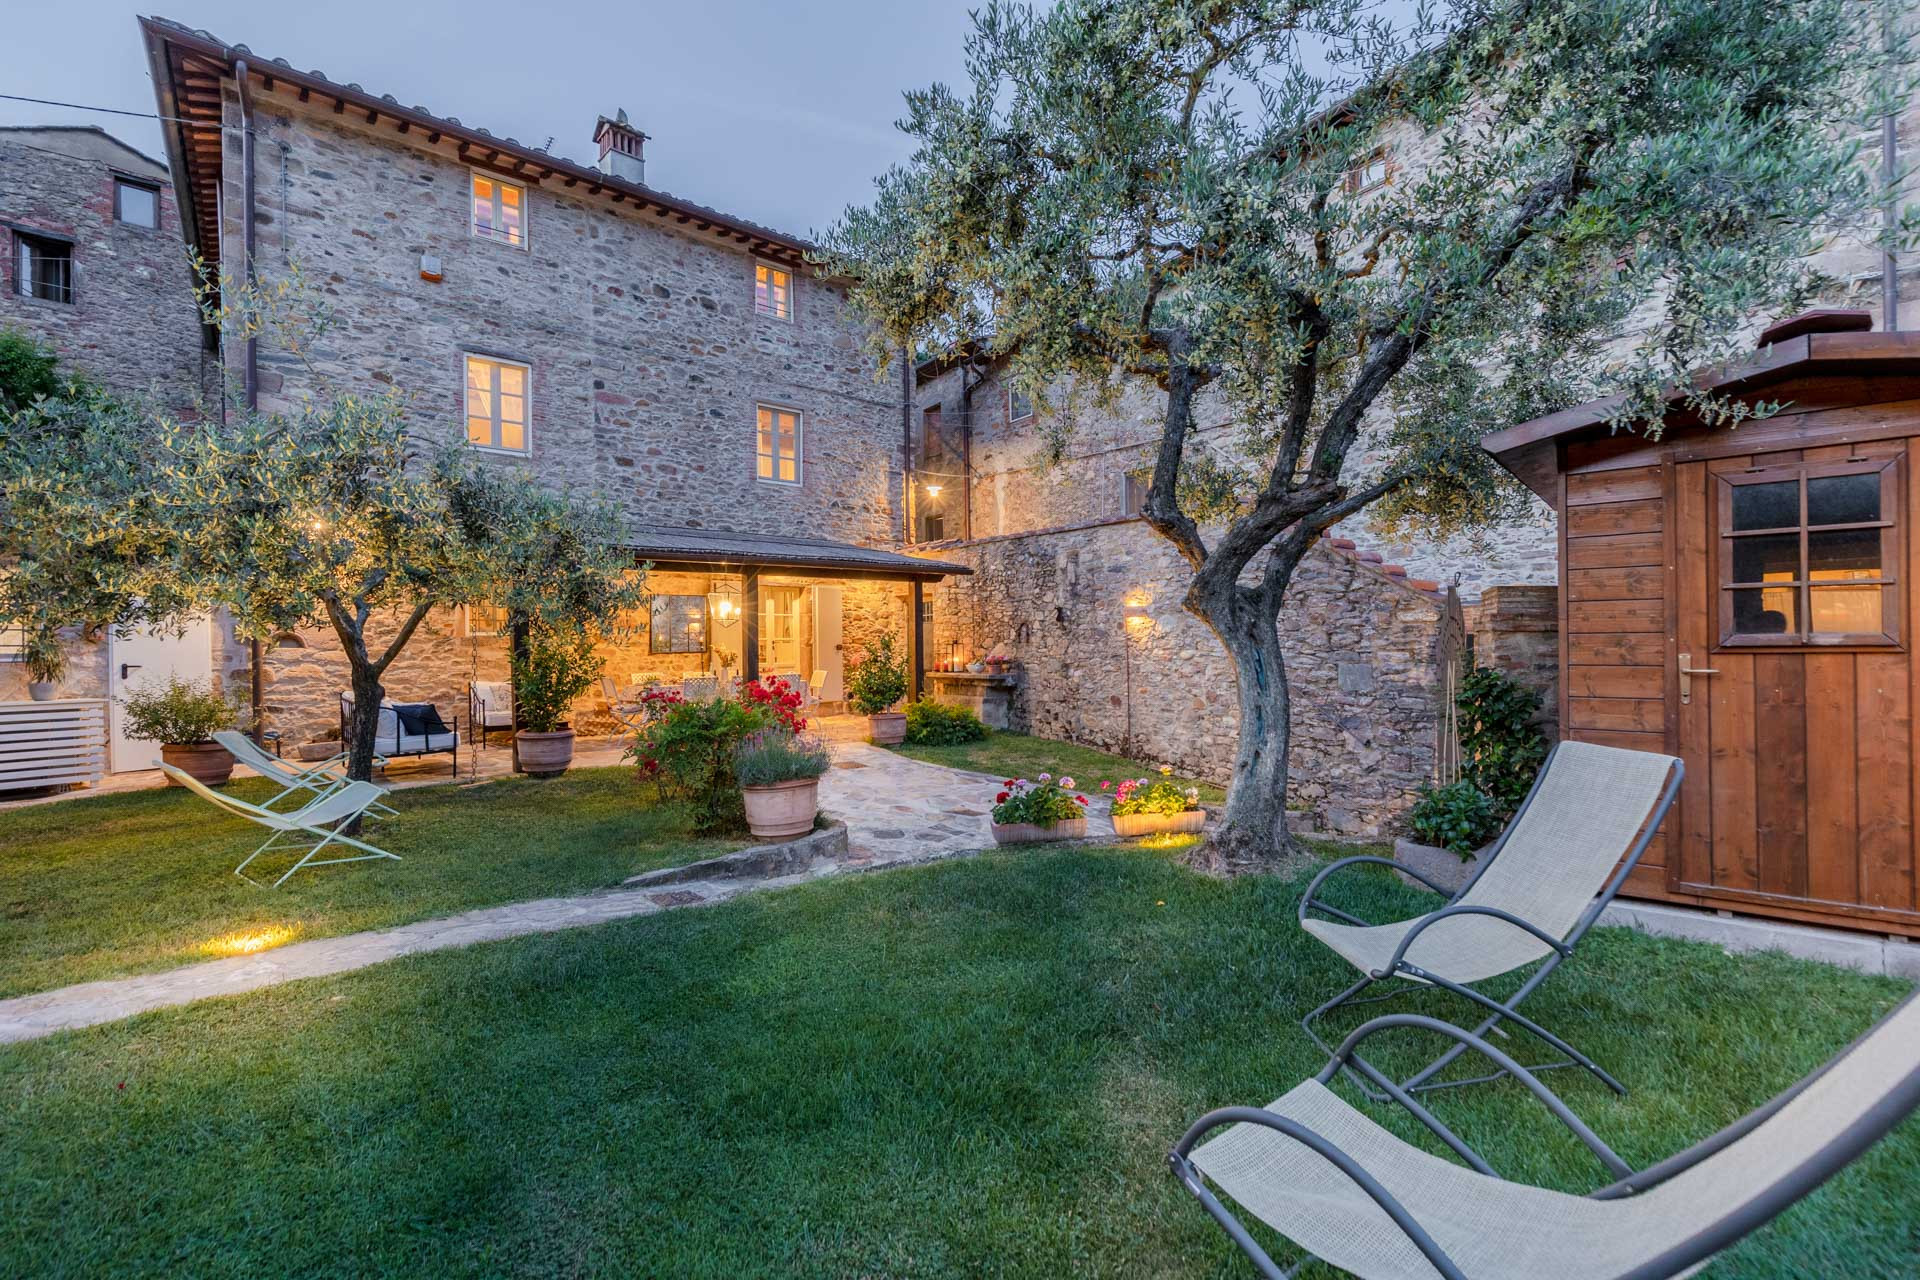 villa à Pieve di Compito - Dimora delle Camelie, a traditional stylish stone farmhouse with garden on the hills of Compitese between Lucca and Pisa